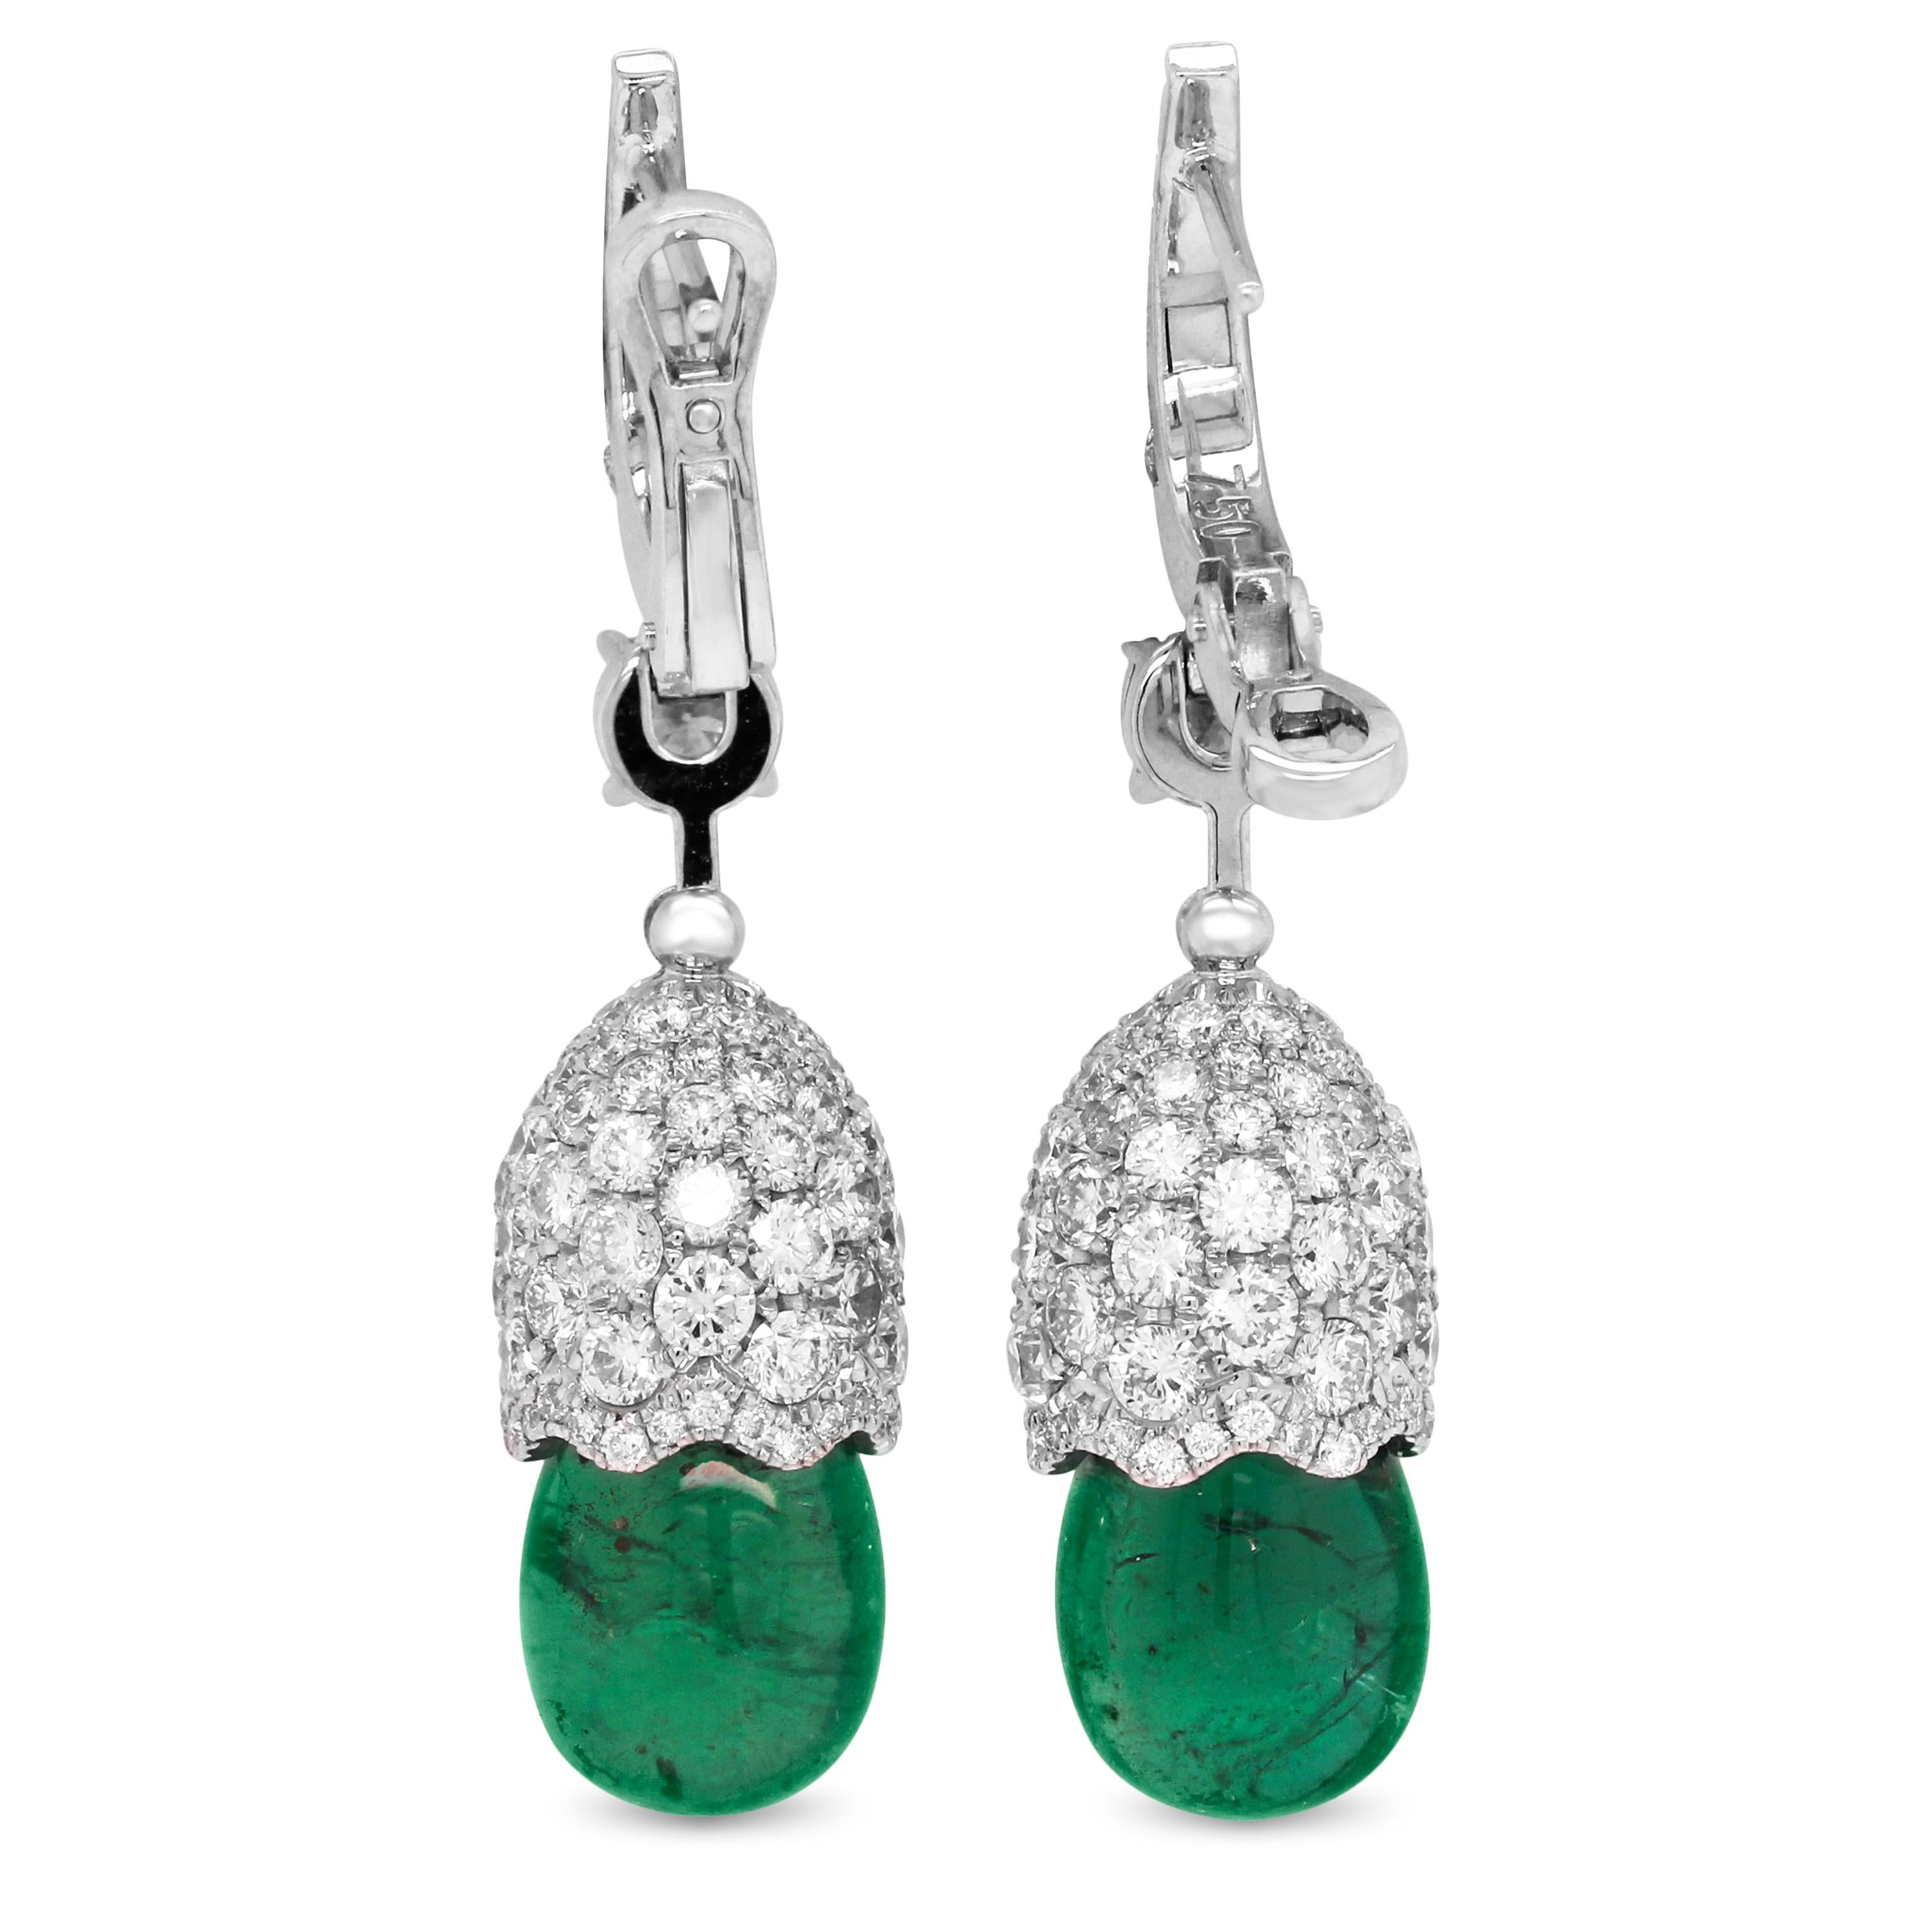 Briolette Cabochon Colombian Emeralds 18K White Gold Diamond Dangle Earrings

These one of a kind earrings features pavé set diamonds all around the top of the two Emeralds.

11.21 carat Cabochon, Briolette cut Colombian Emeralds

3.90 carat G